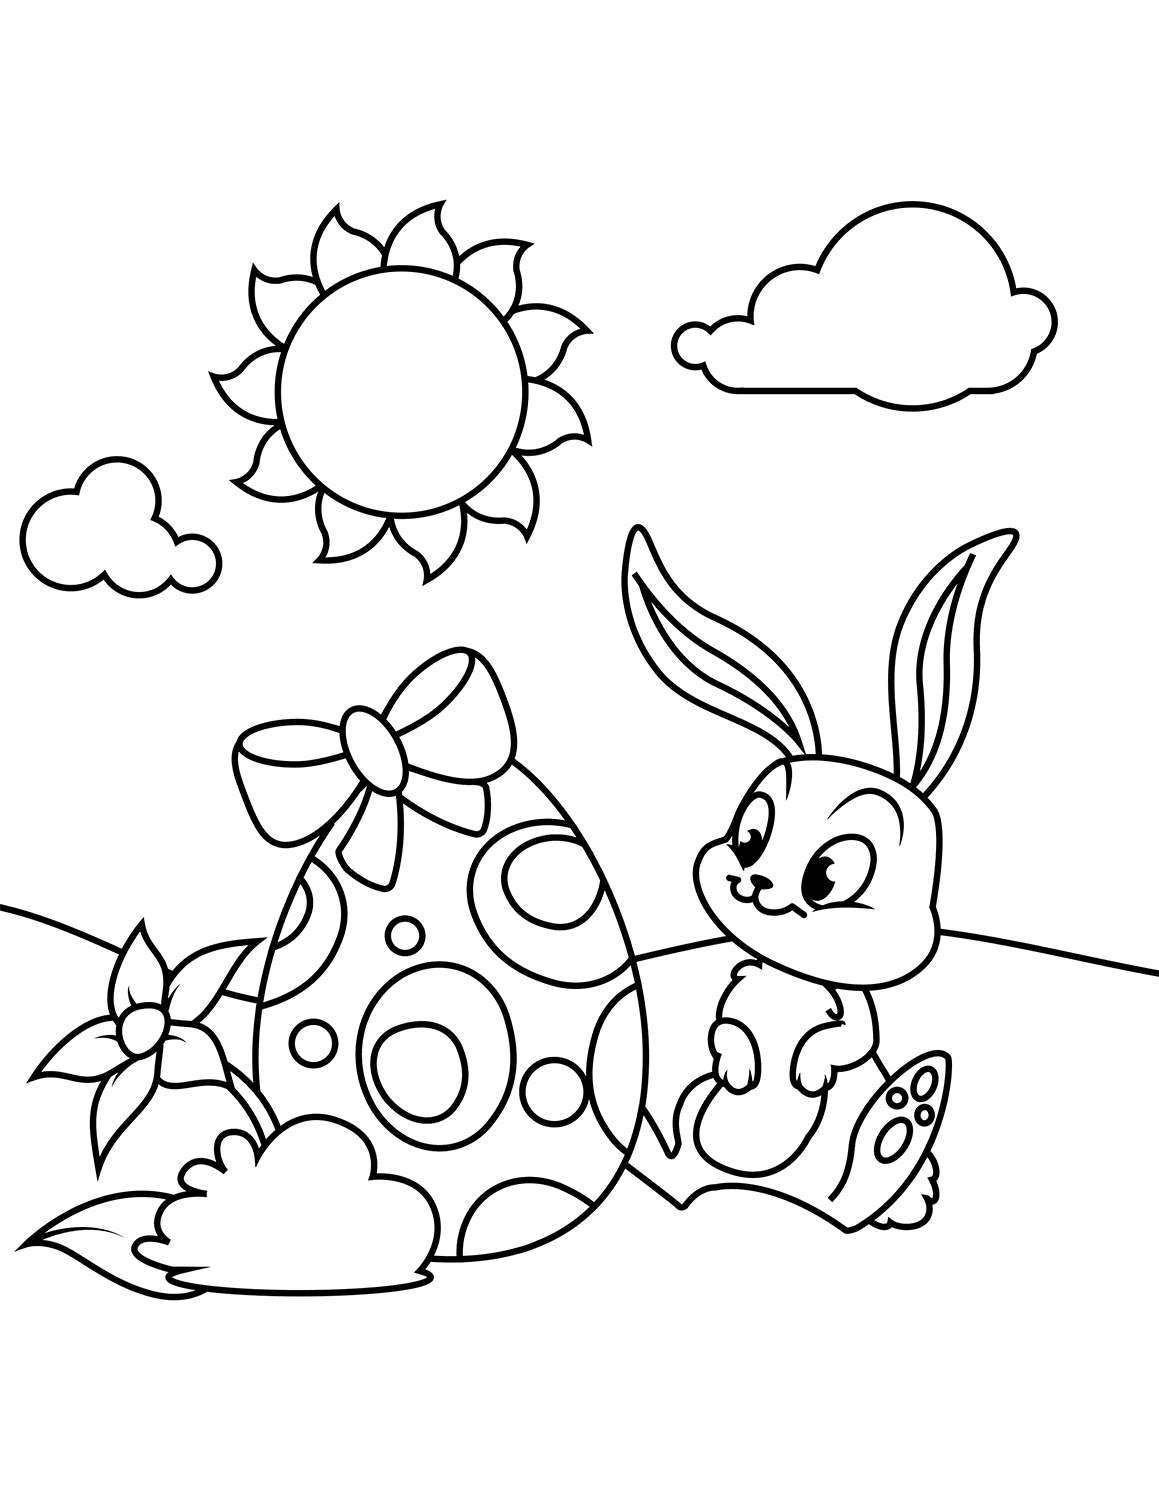 Cute Bunny And Easter Egg Coloring Page